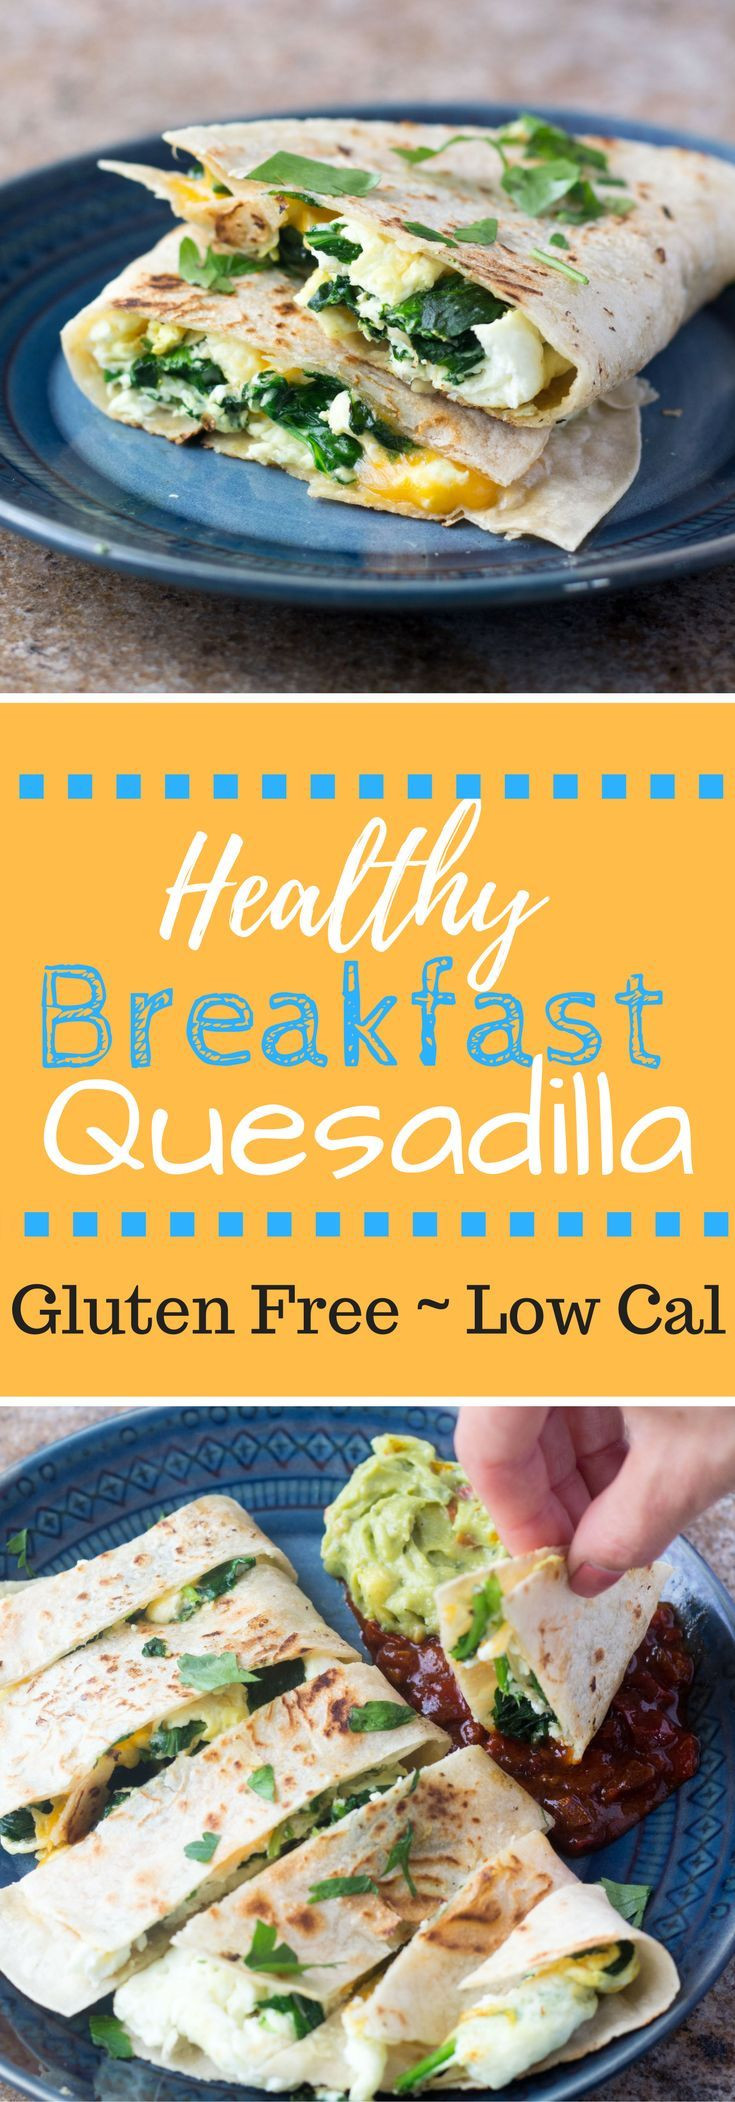 Healthy Dairy Free Breakfast
 This Healthy Breakfast Quesadilla is filled with spinach